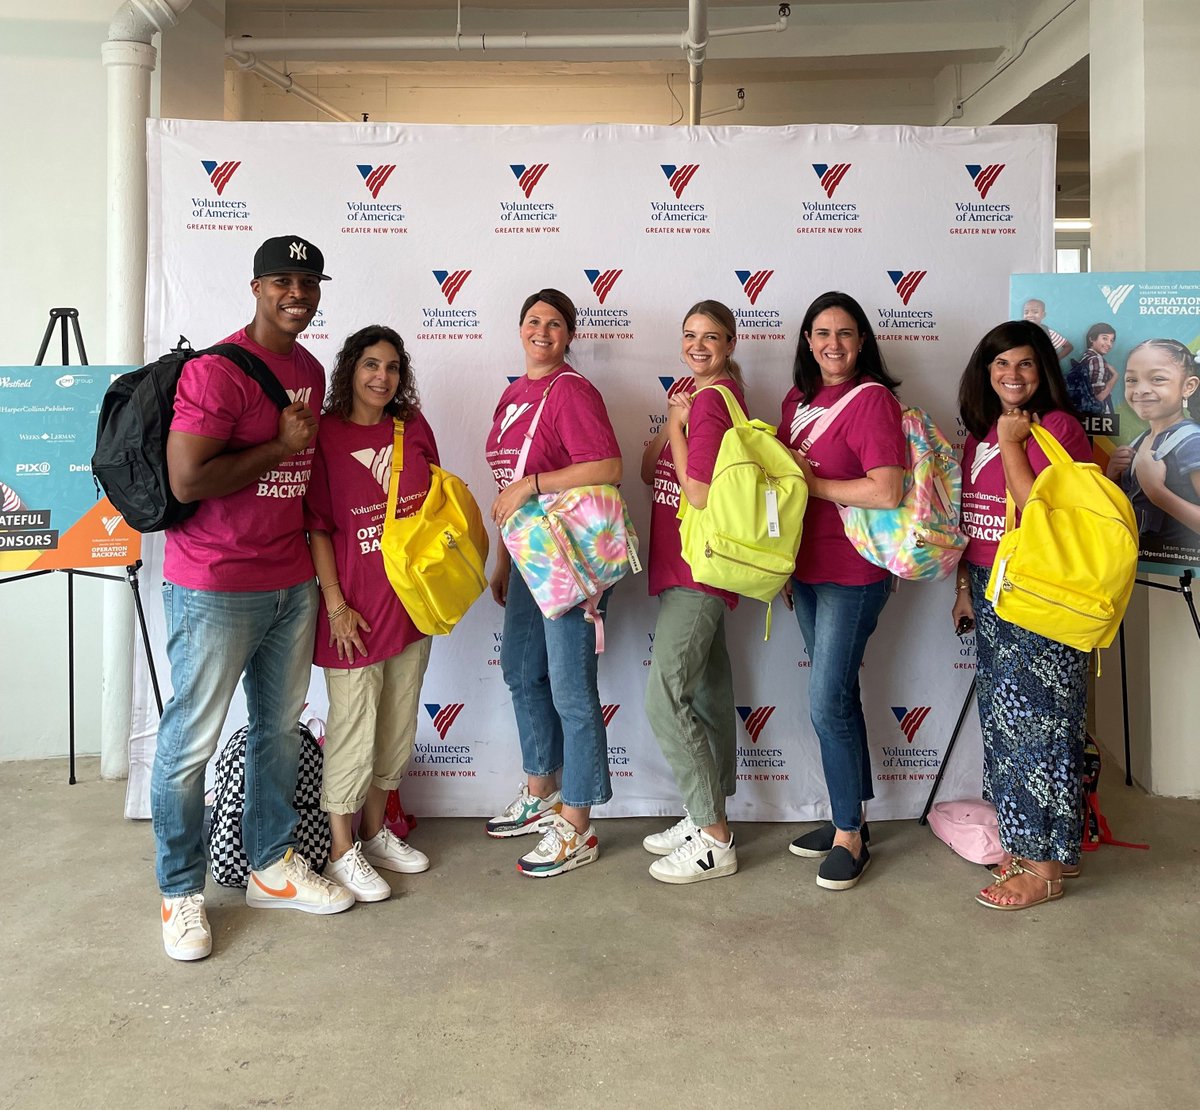 WPC NY employees spent the day with @VOAgny sorting school supplies into backpacks to support children in need through #OperationBackpackNYC! In total, we filled over 150 backpacks which will be sent to shelters in Staten Island and the Bronx. #DoingGoodWhileDoingWell